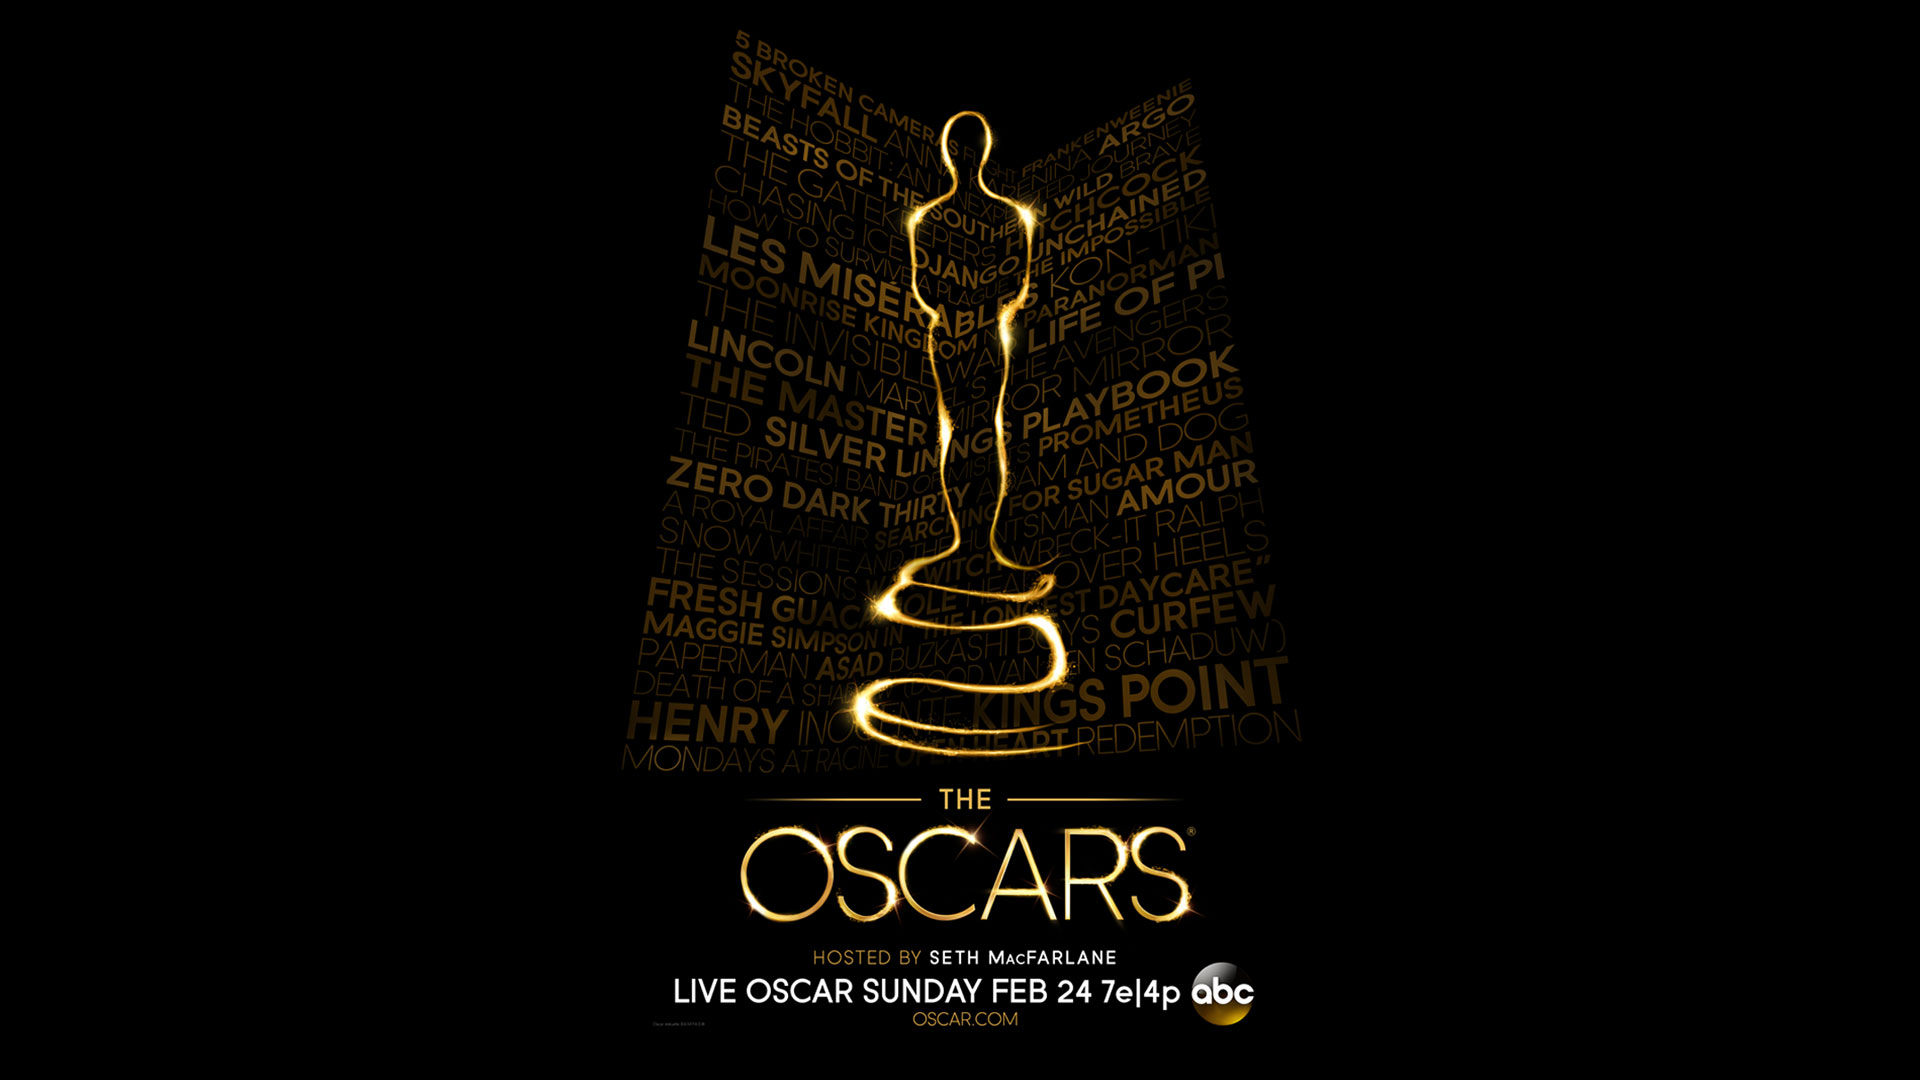 AMC Best Picture Showcase Helps Fans Watch All the Academy Awards Nominated Films ...1920 x 1080